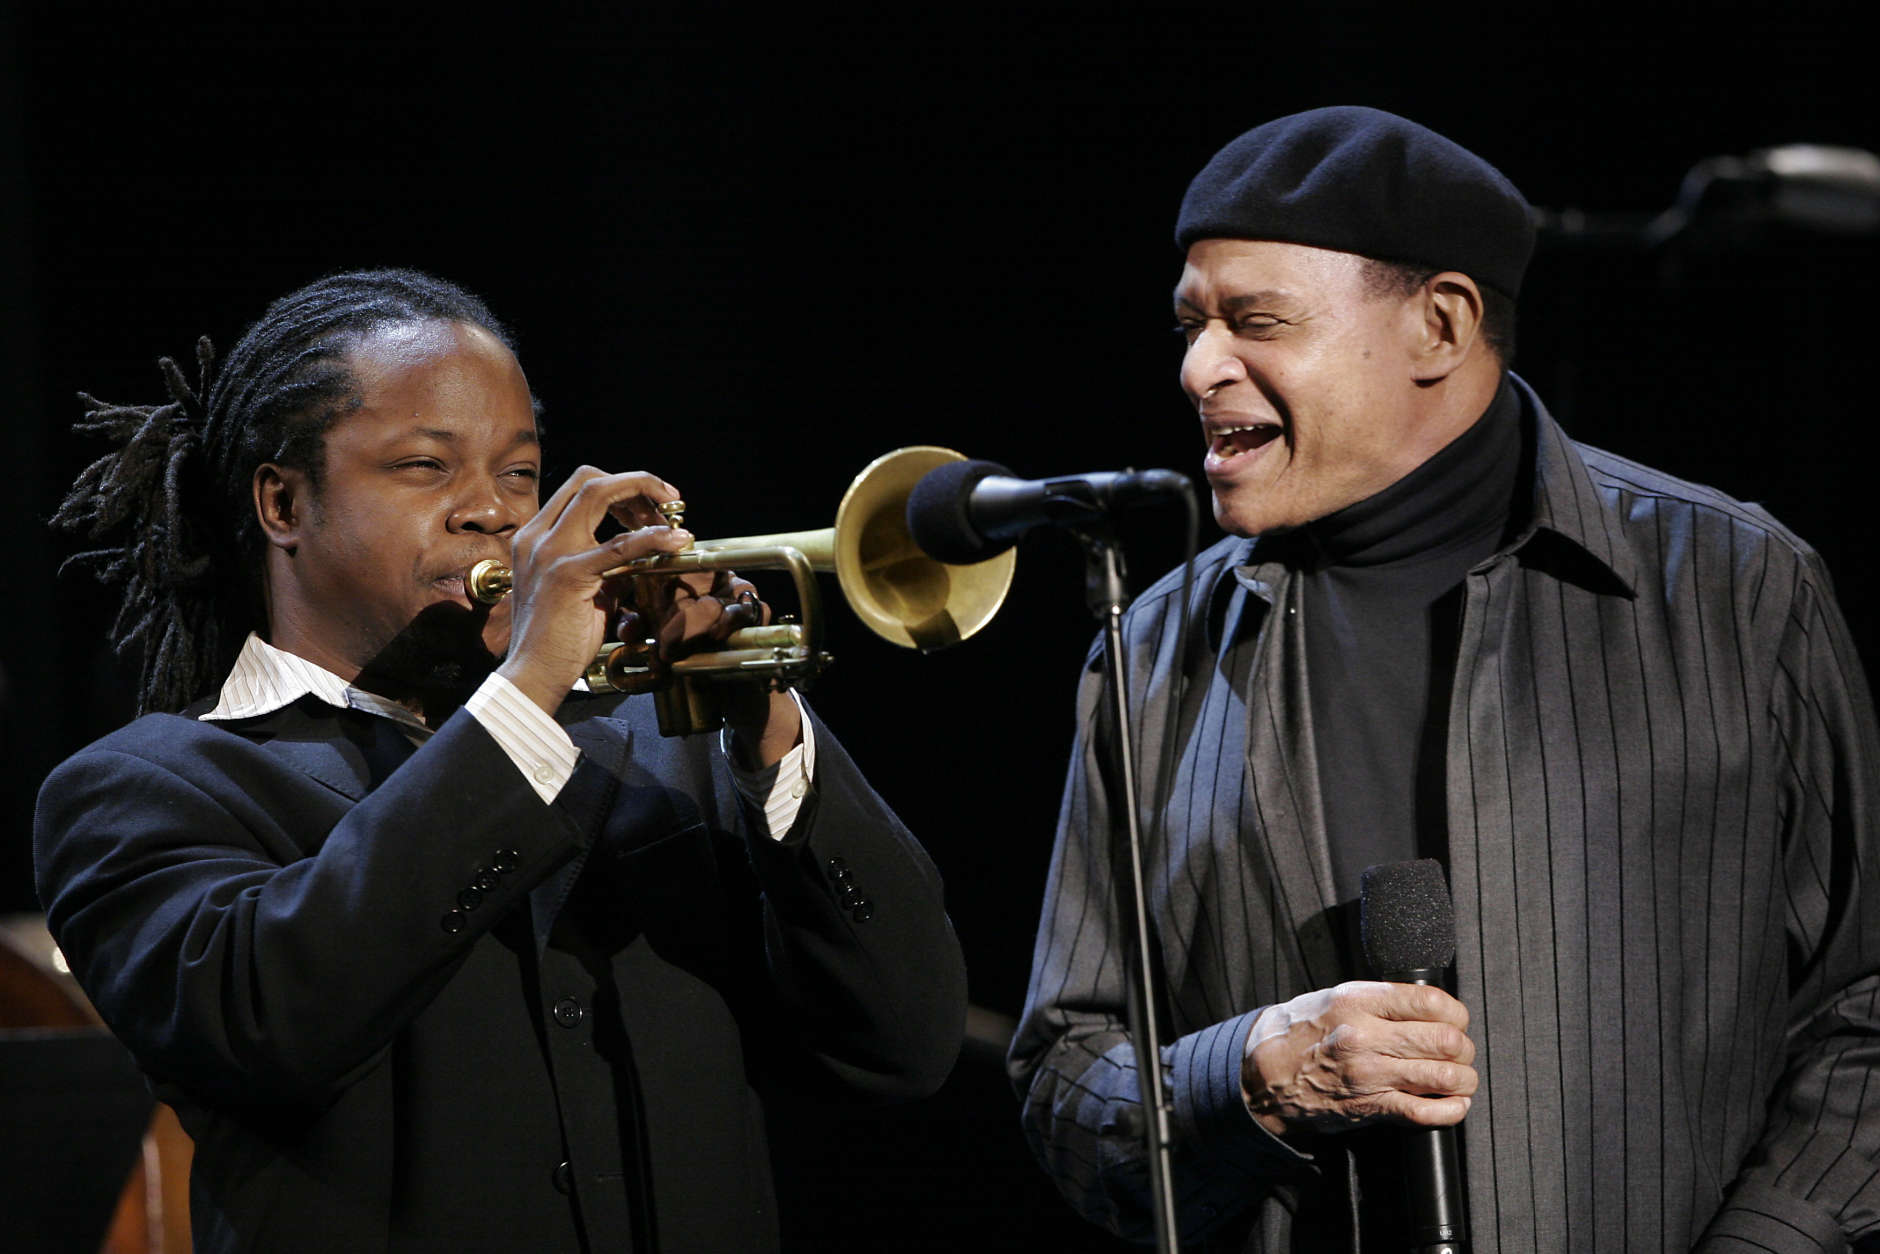 Al Jarreau, right, and Ambrose Akinmusire  perform during an all-star tribute concert for Herbie Hancock, Sunday, Oct. 28, 2007, in Los Angeles. The concert is part of the Thelonius Monk International Jazz competitio, which Akinmusire won.  (AP Photo/Rene Macura)